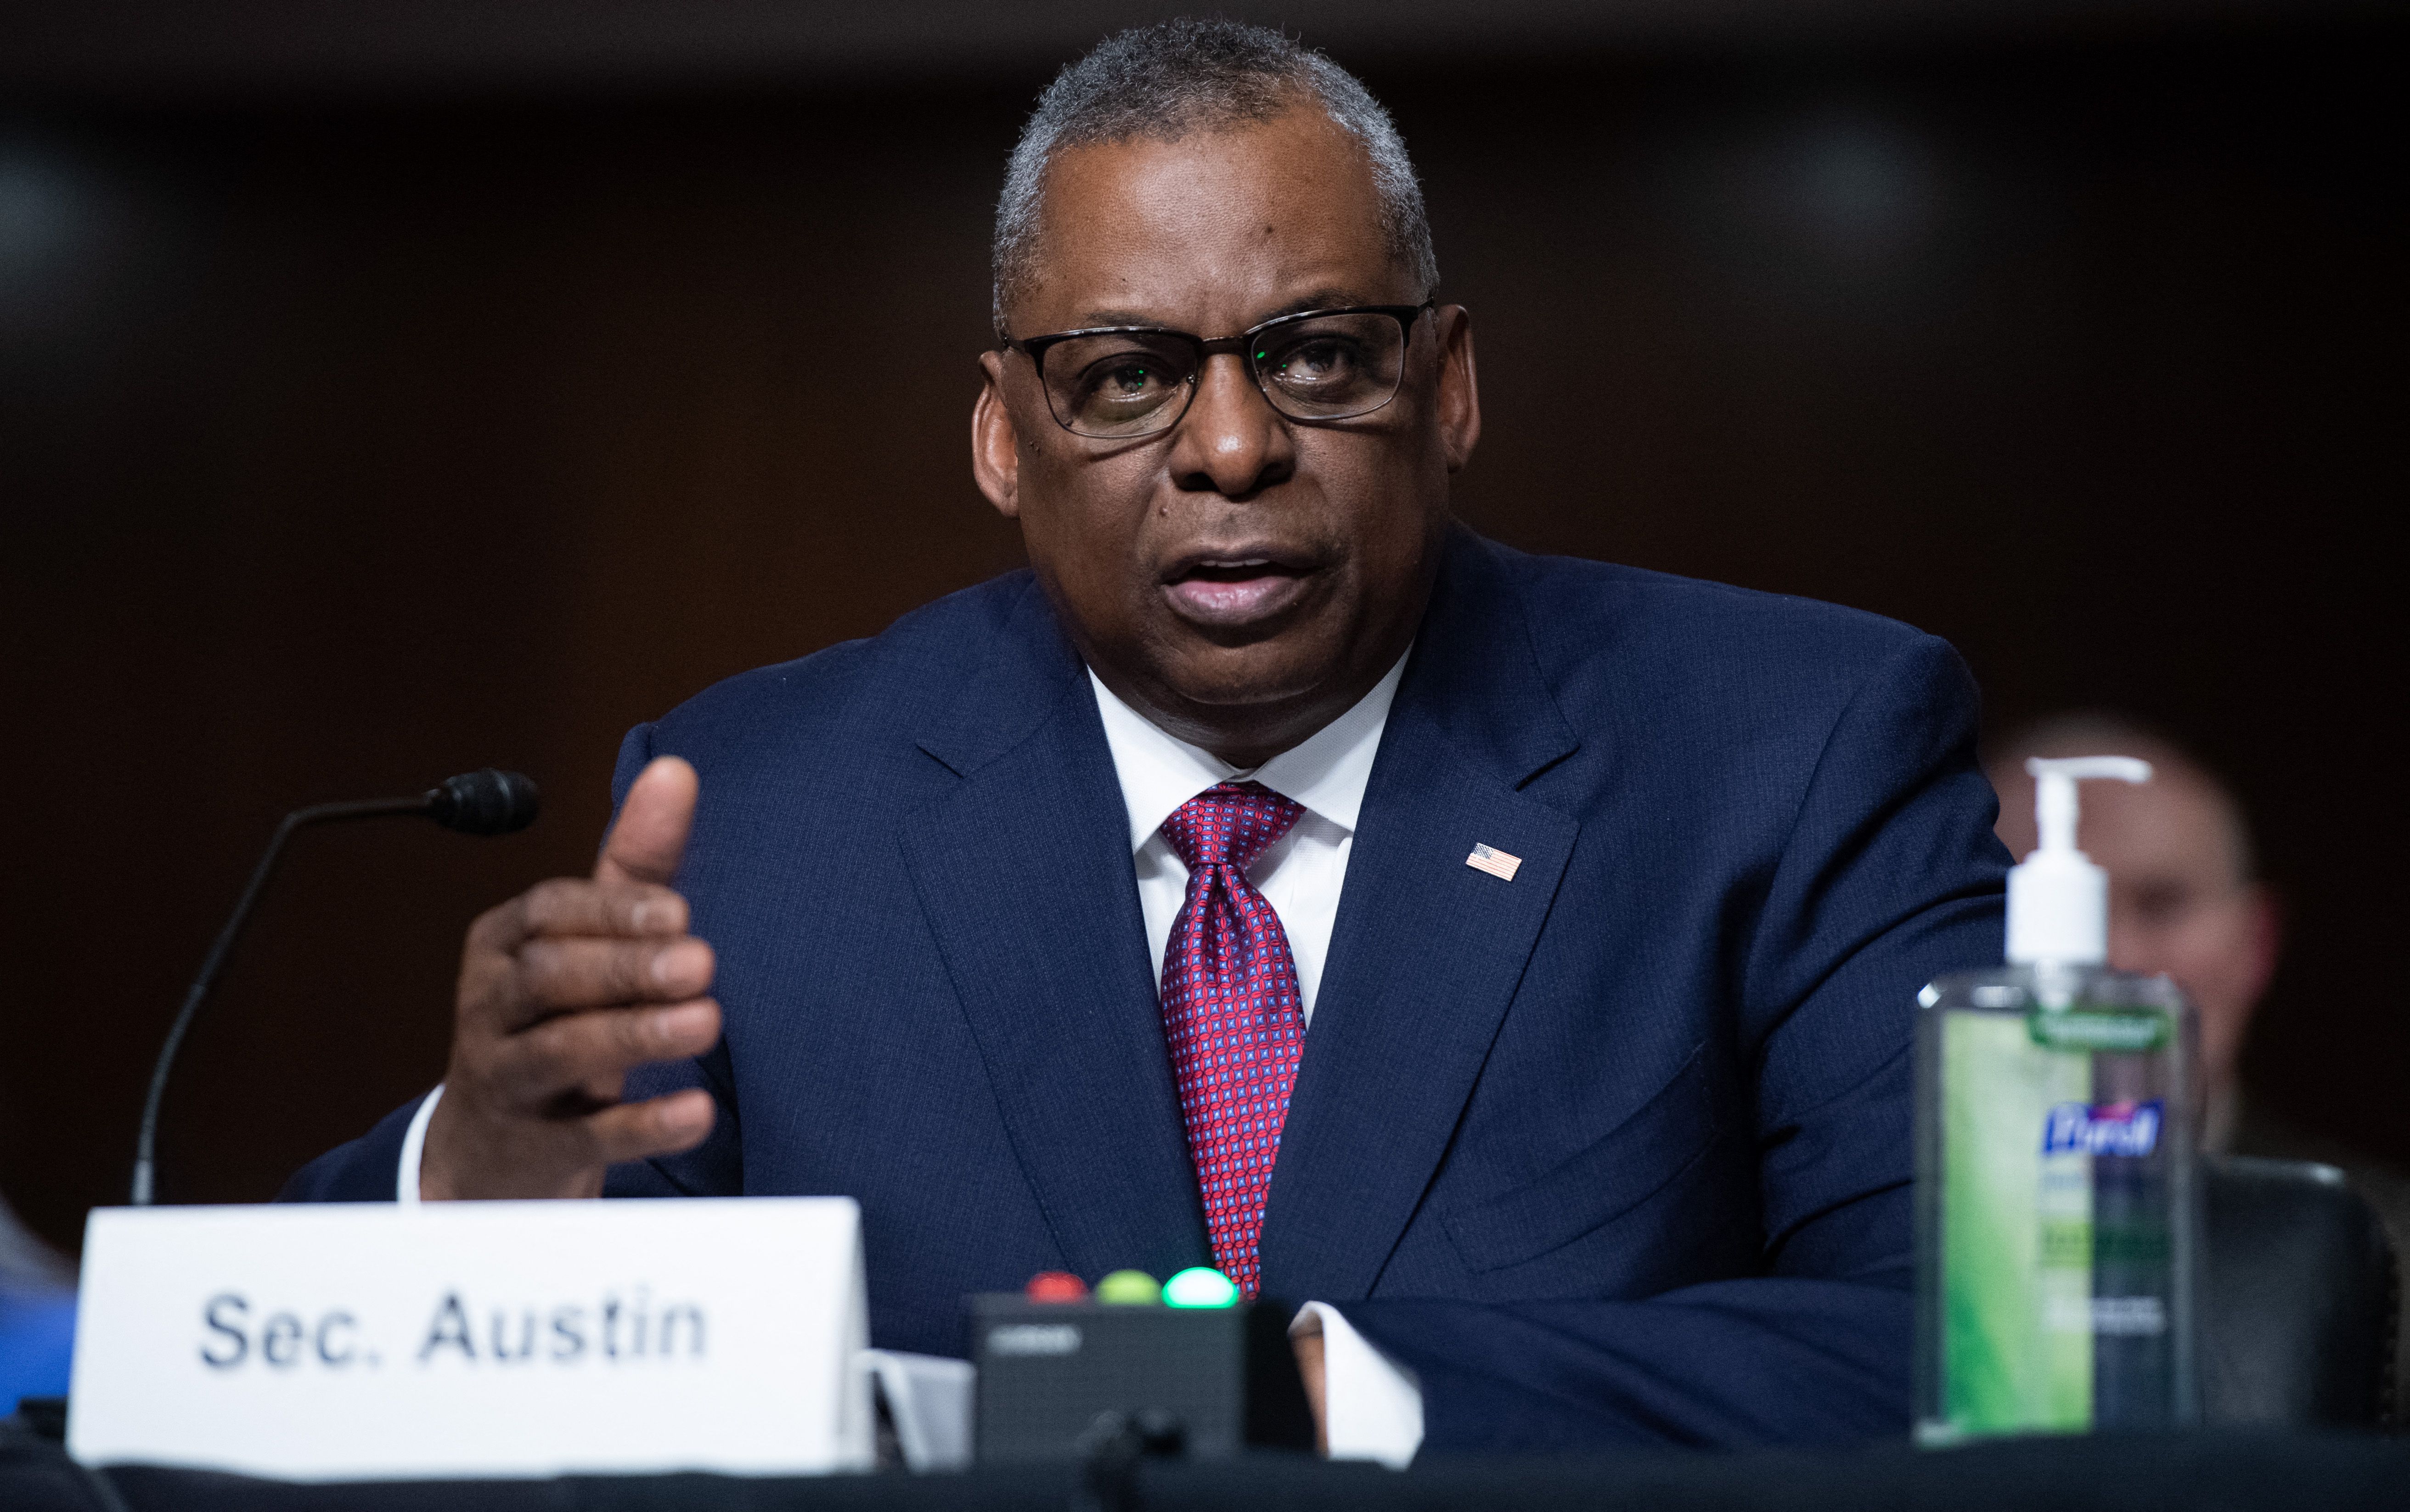 US Secretary of Defense Lloyd Austin III testifies during a Senate Armed Services Committee hearing on Capitol Hill in Washington, DC, on April 7.